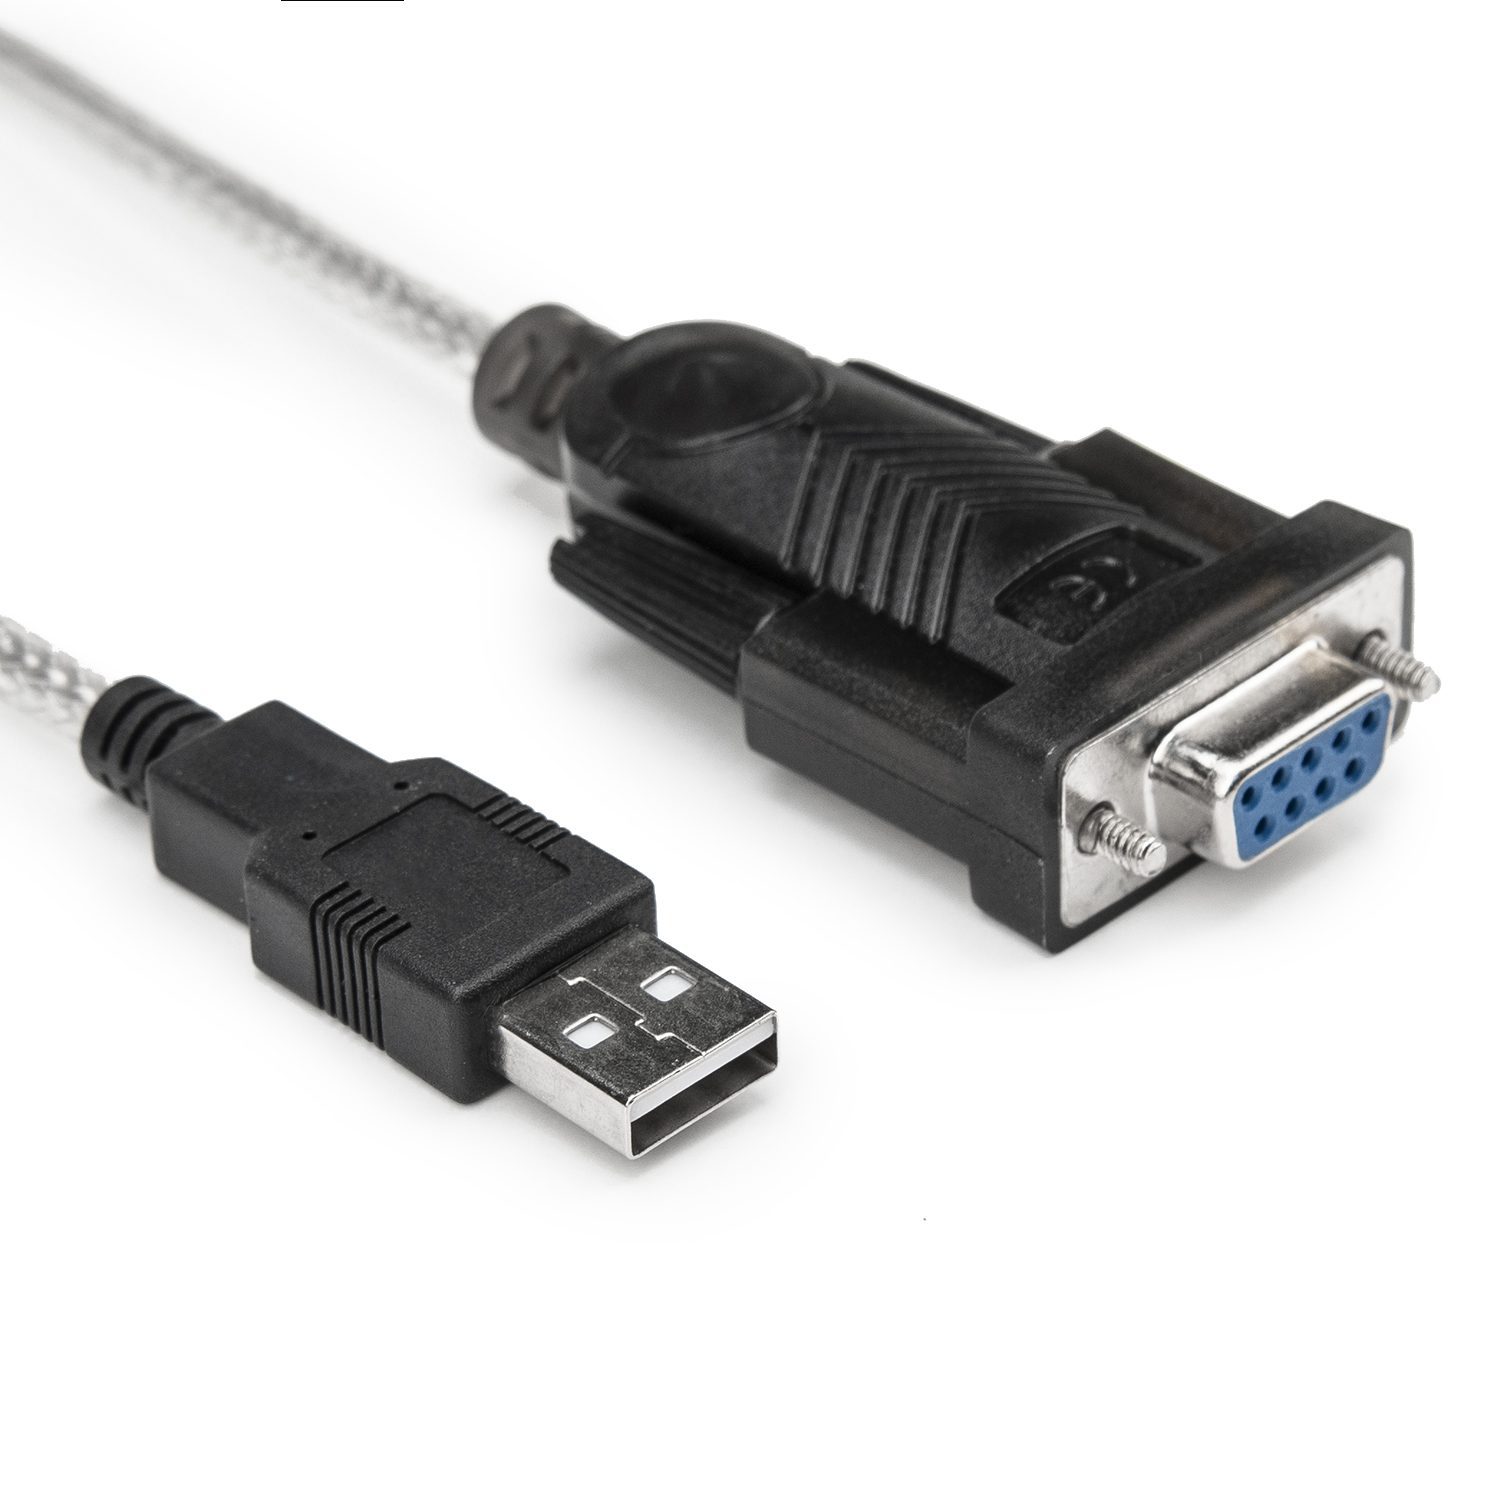 6FT RS232 DB9 9Pin Female to USB 2.0 A Male Serial Cable Adapter